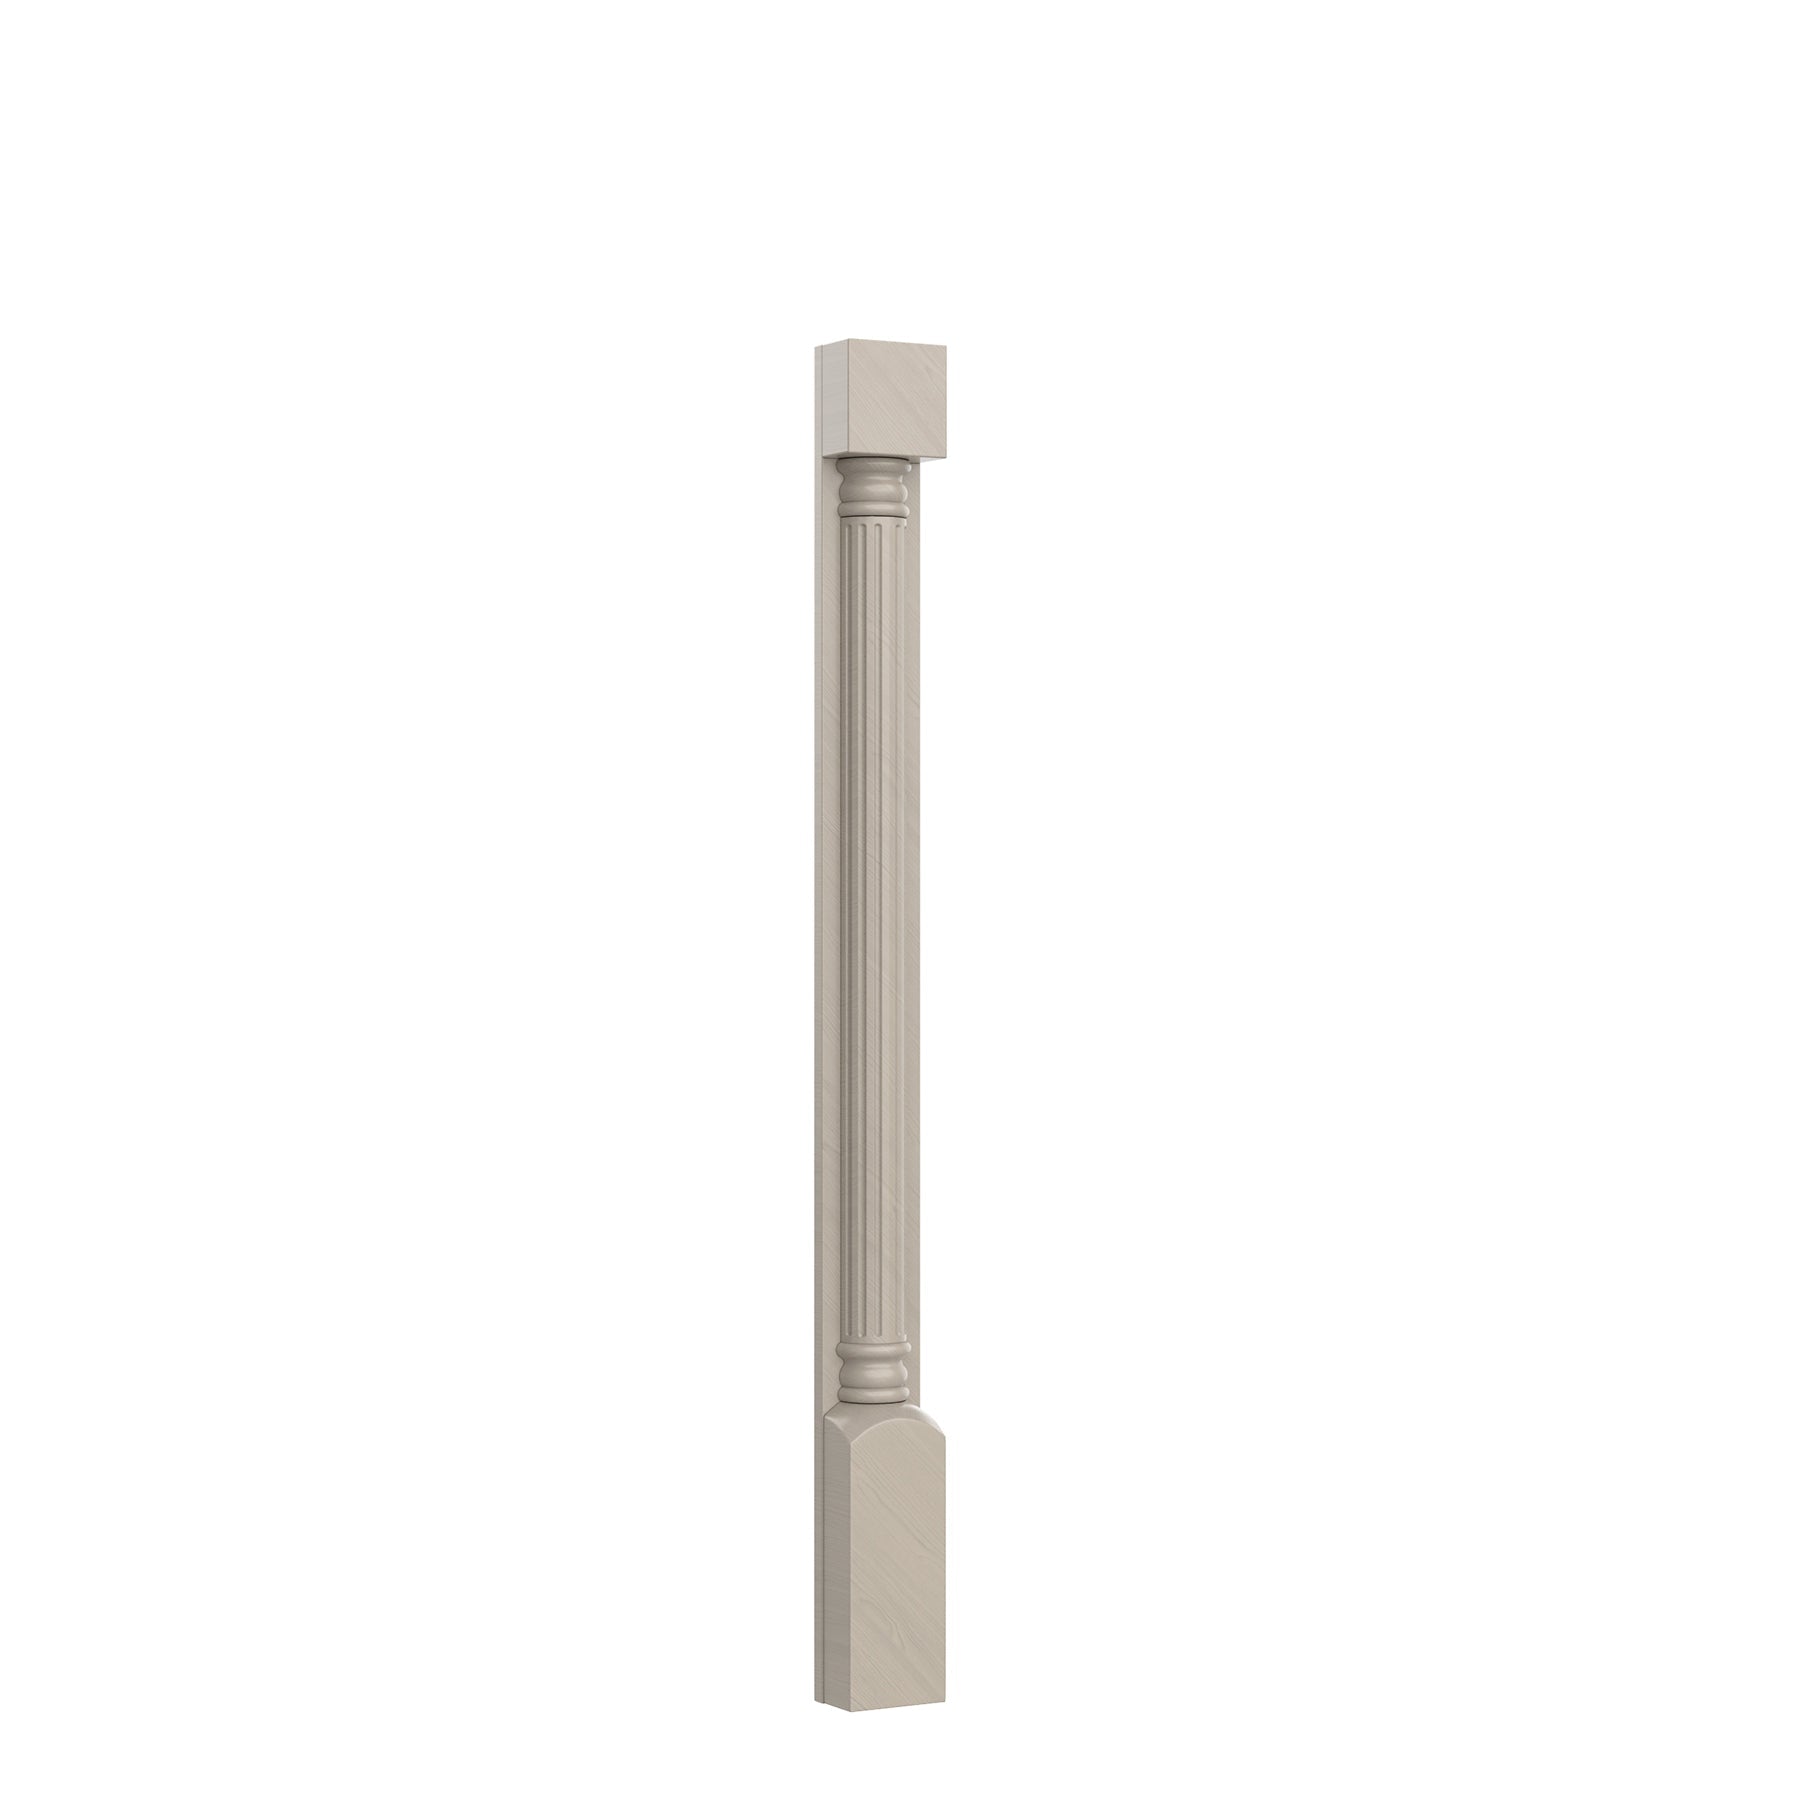 RTA - Spindle - Fluted | 2.5"W x 30"H x 0.5"D - Richmond Stone